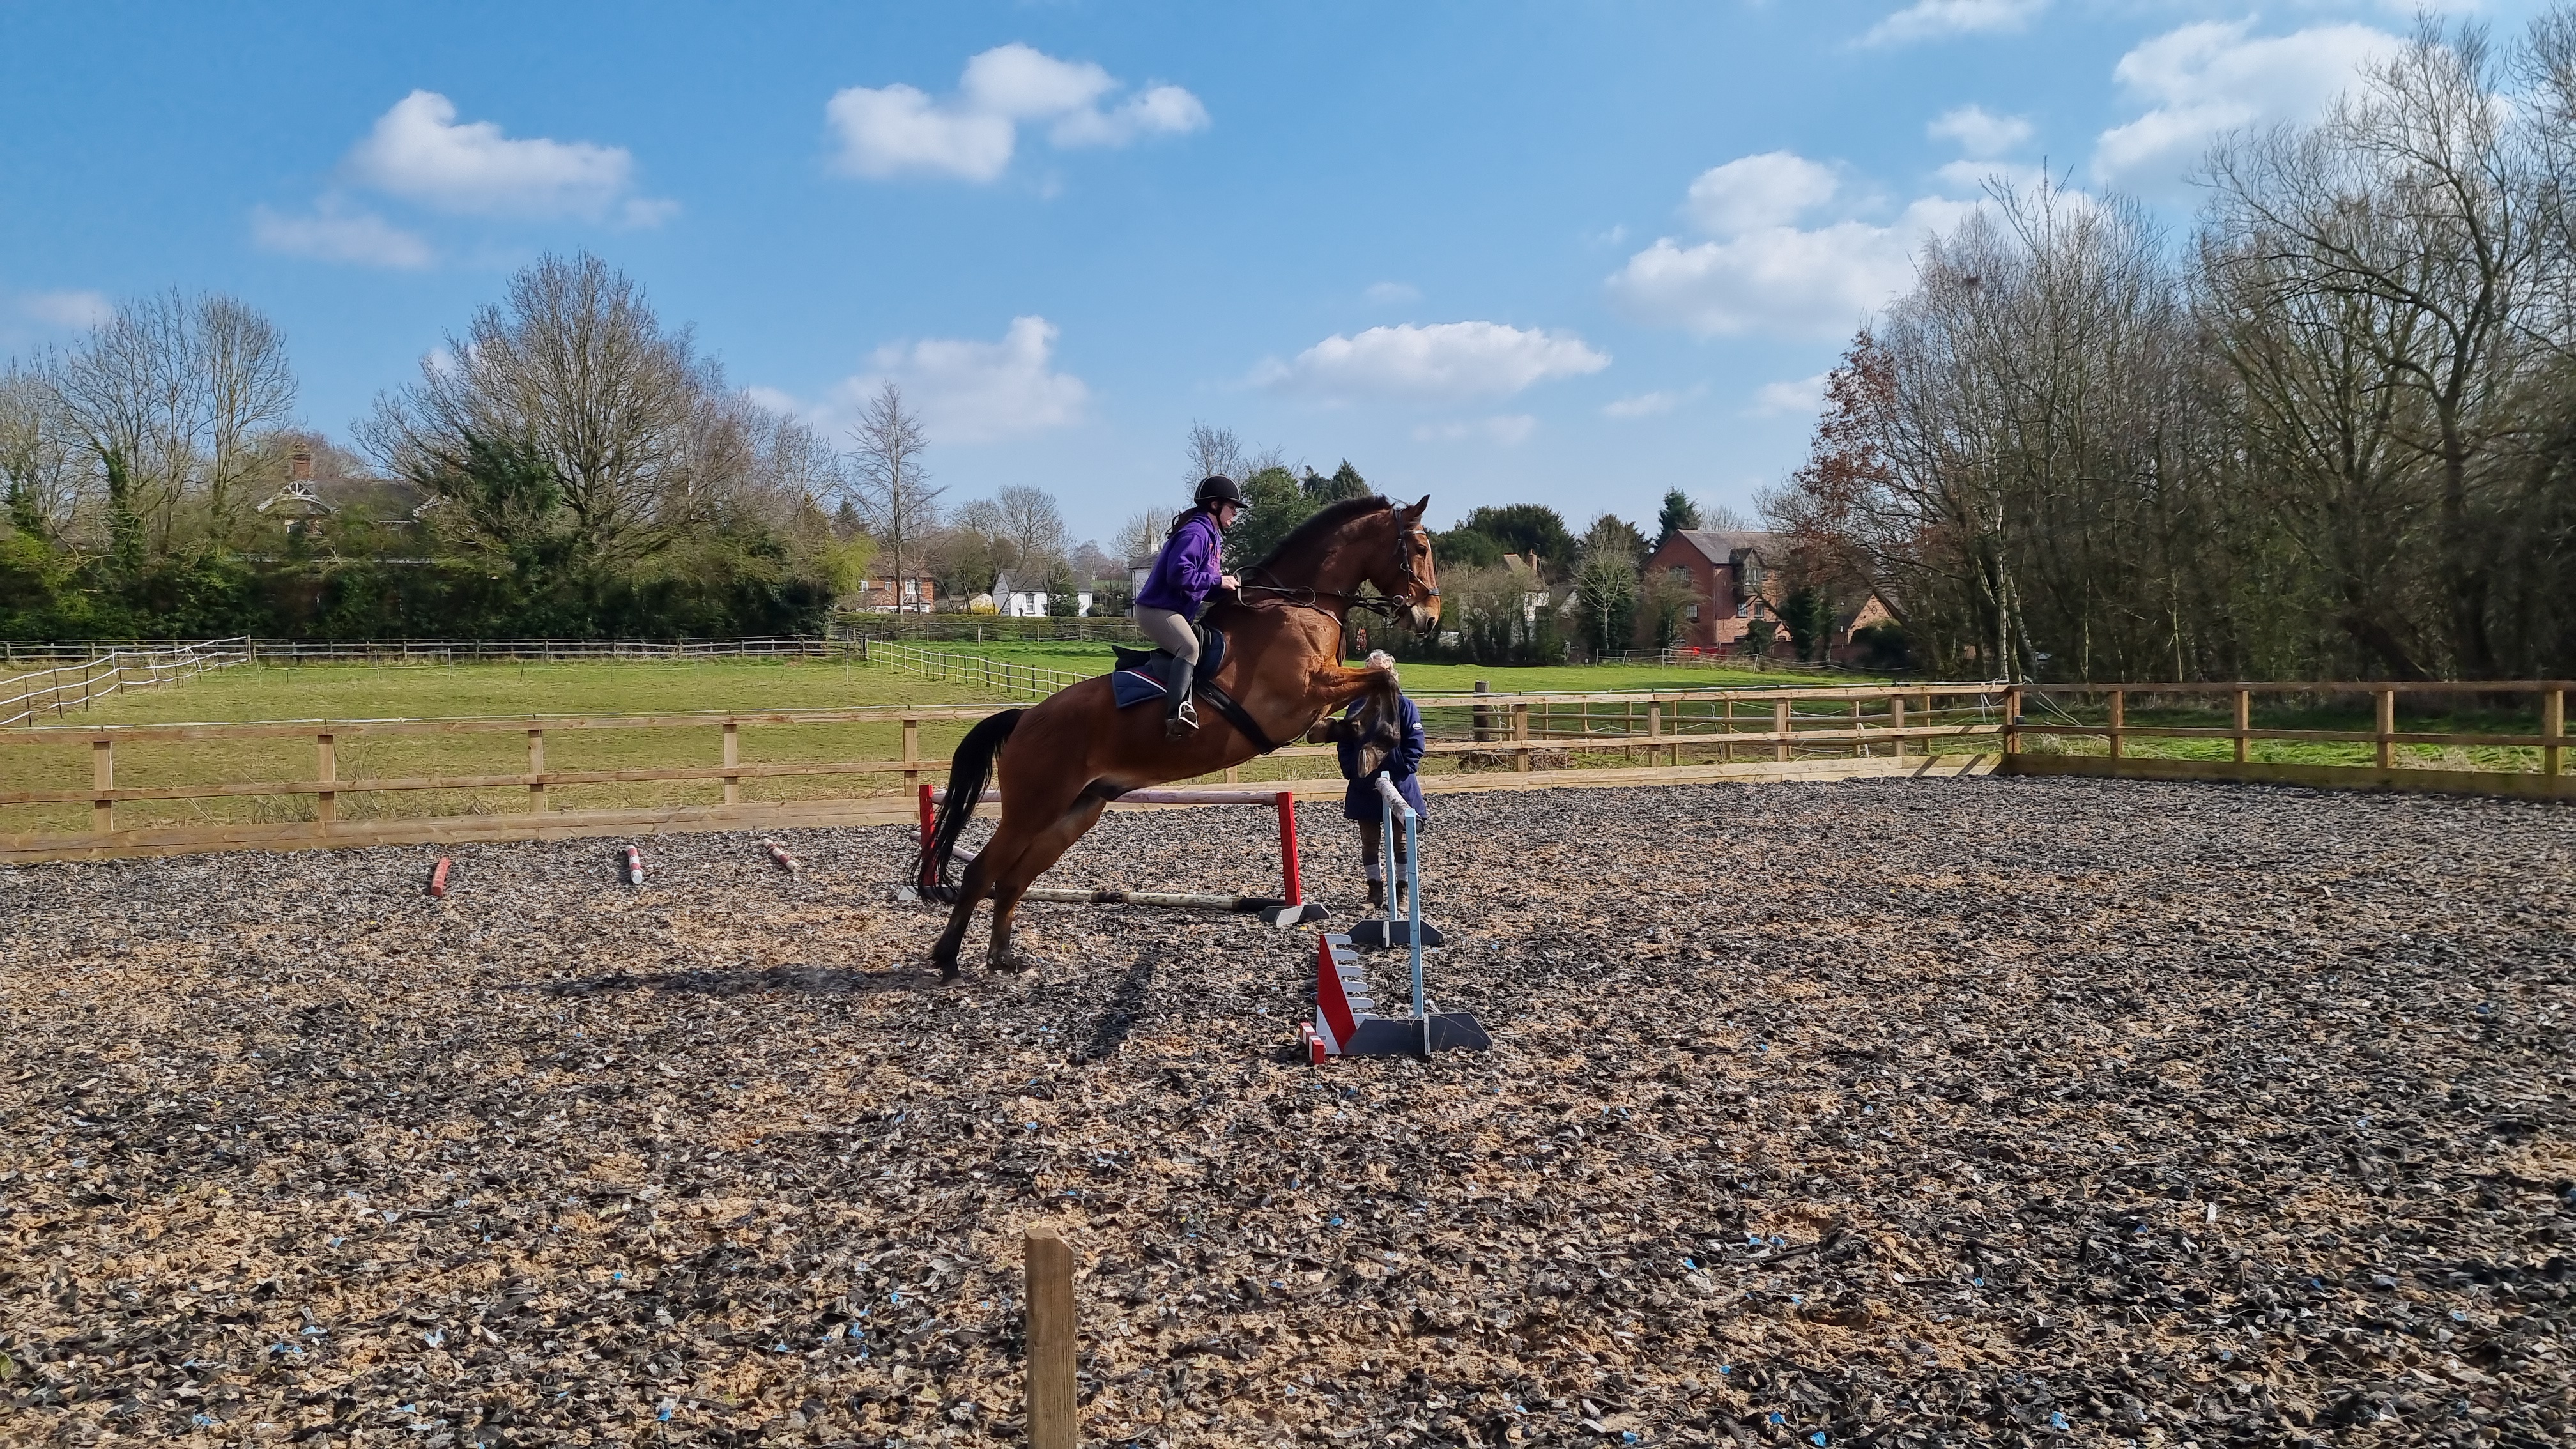 Paula's Blog - The jumps are increasing